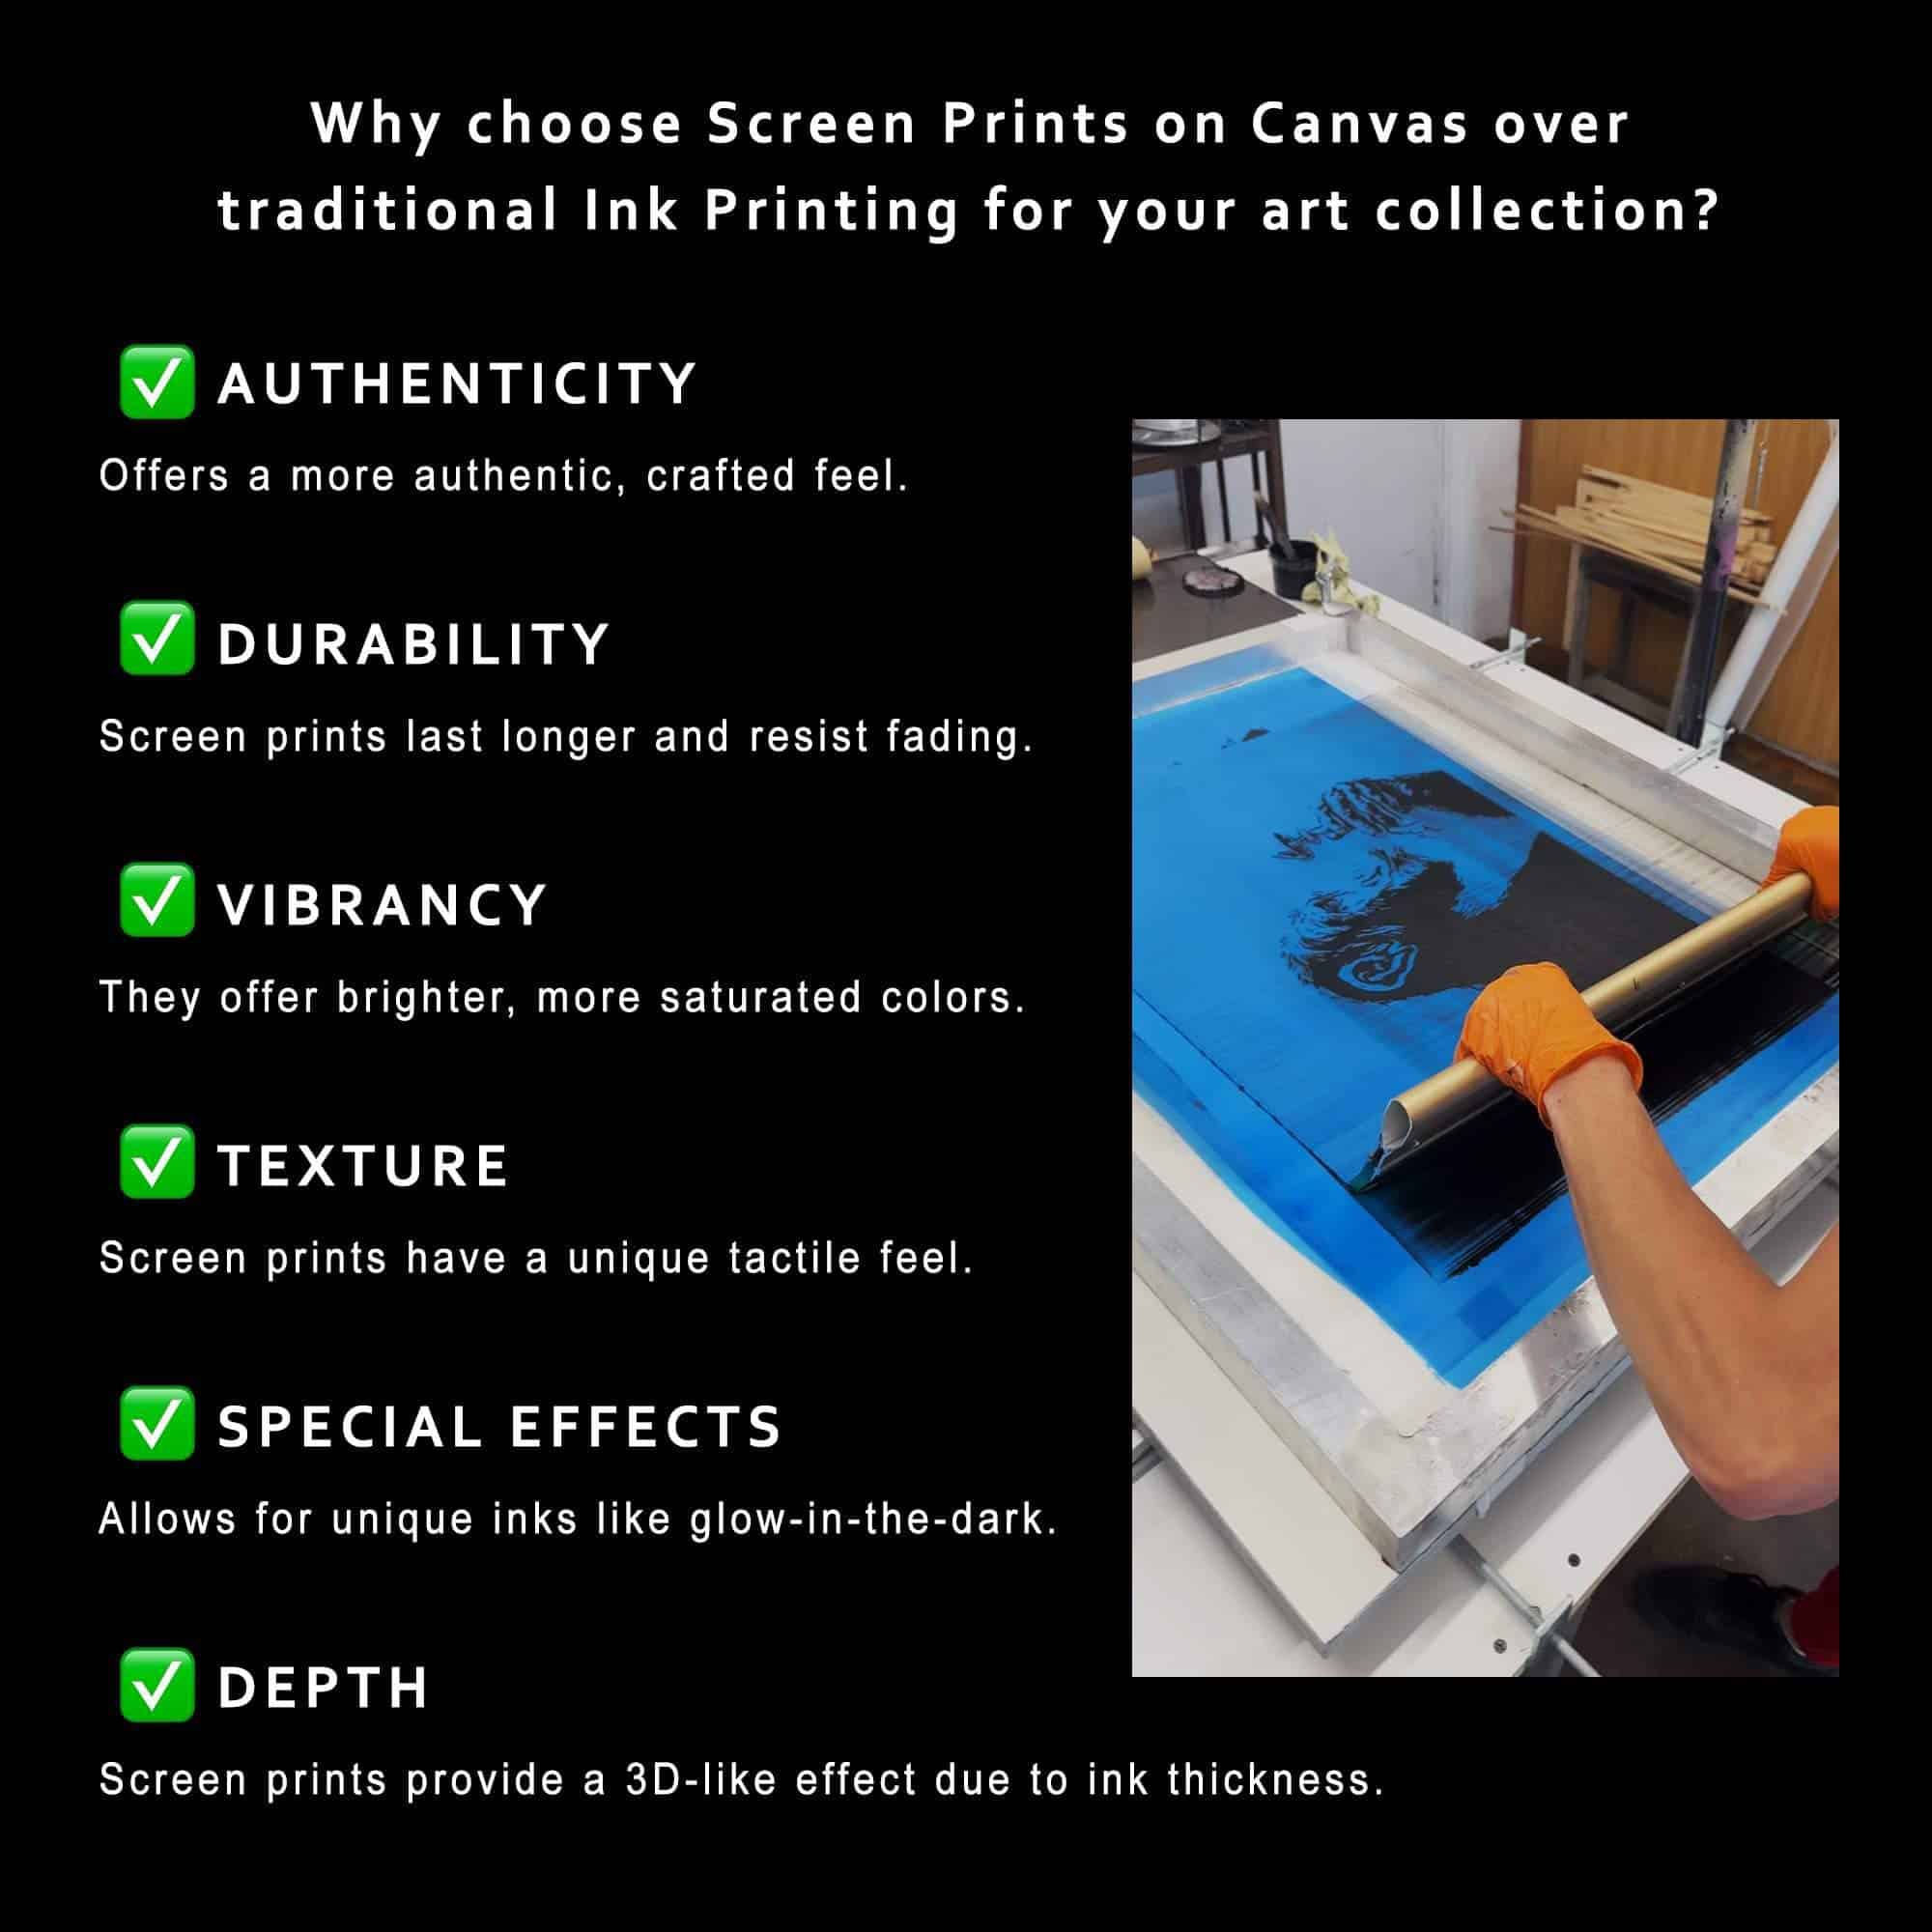 image with screen art process with description of Screen art printing